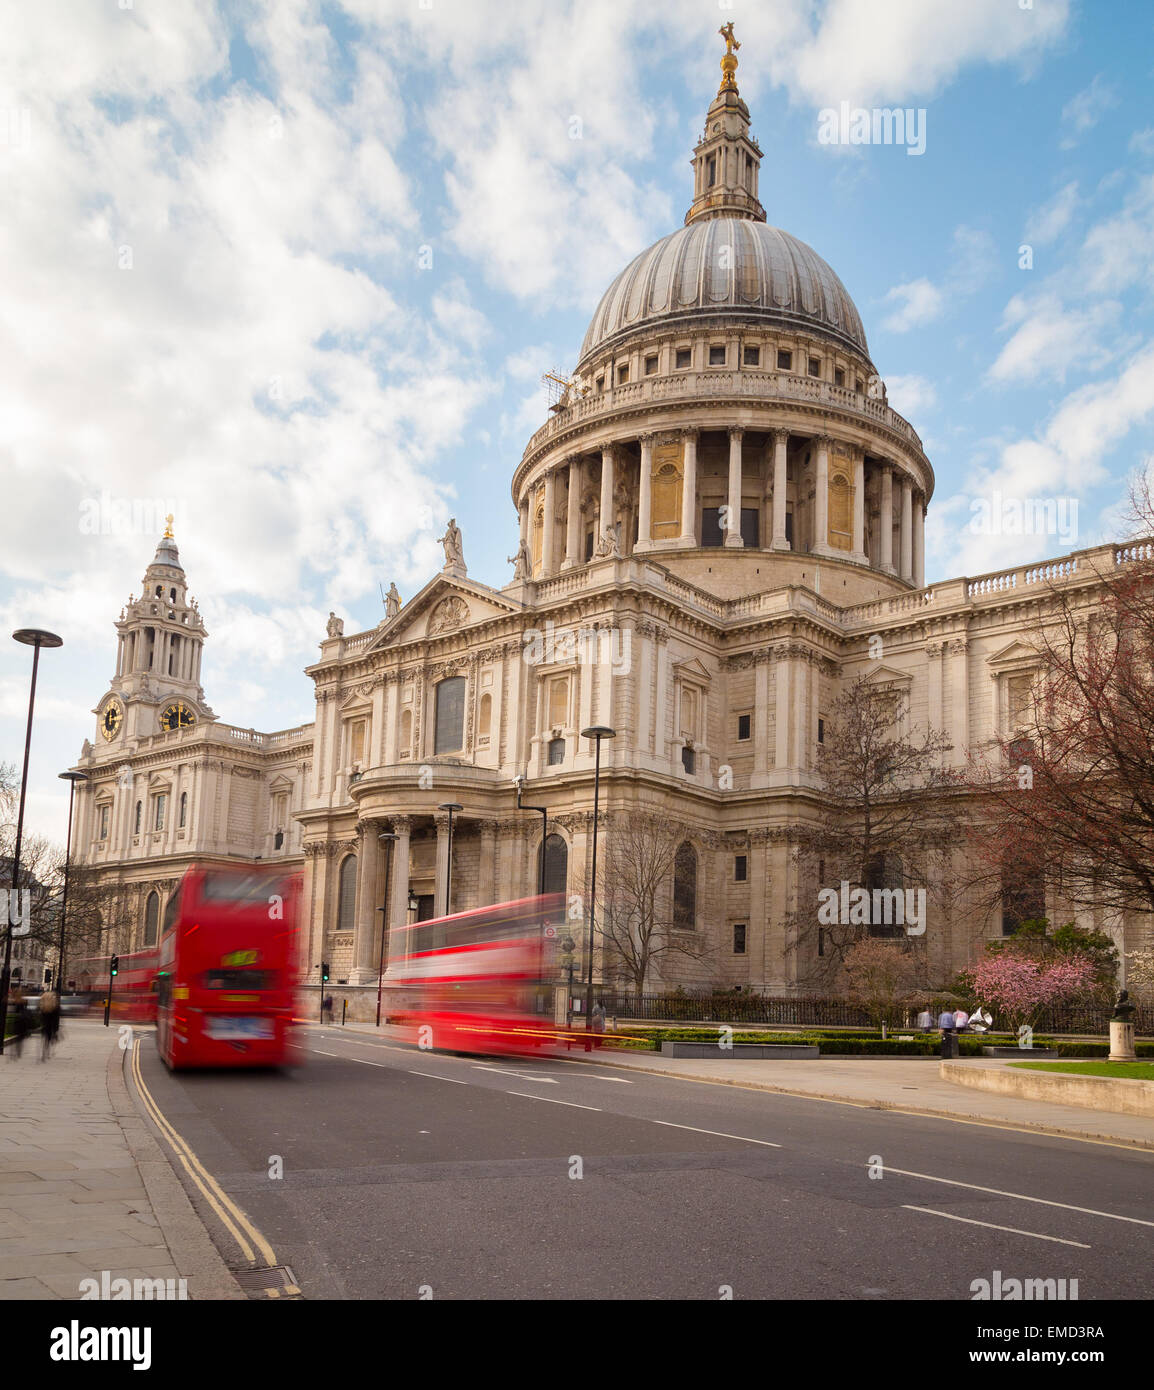 St Paul's Cathedral and Traffic during the day showing double decker buses on the road Stock Photo